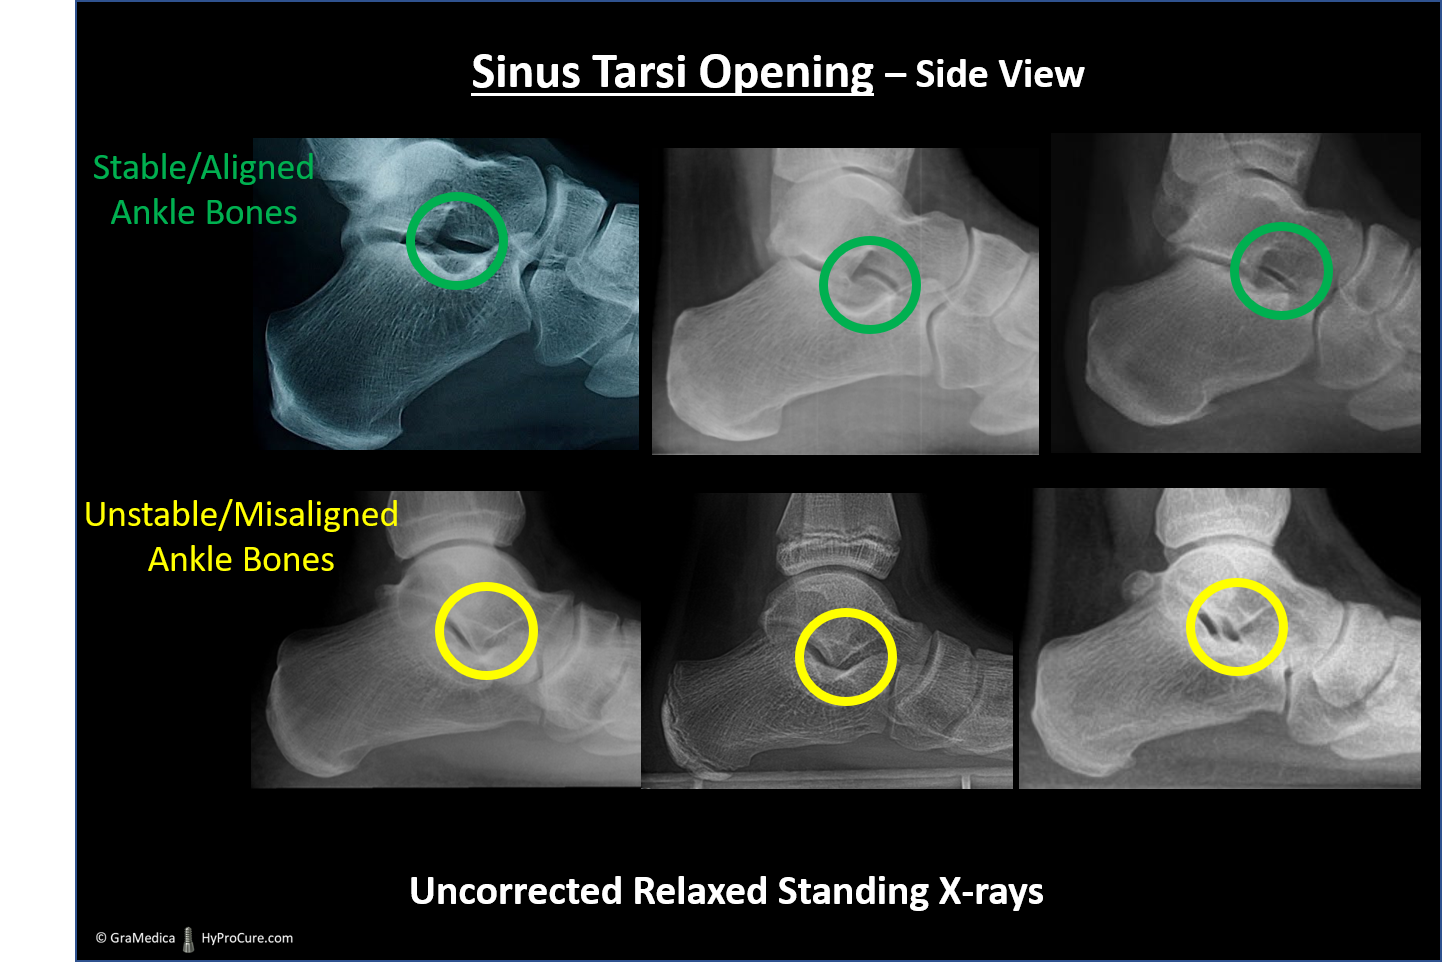 Side view x-ray showing Sinus Tarsi Space of stable ankle bones compared to a unstable ankle bones